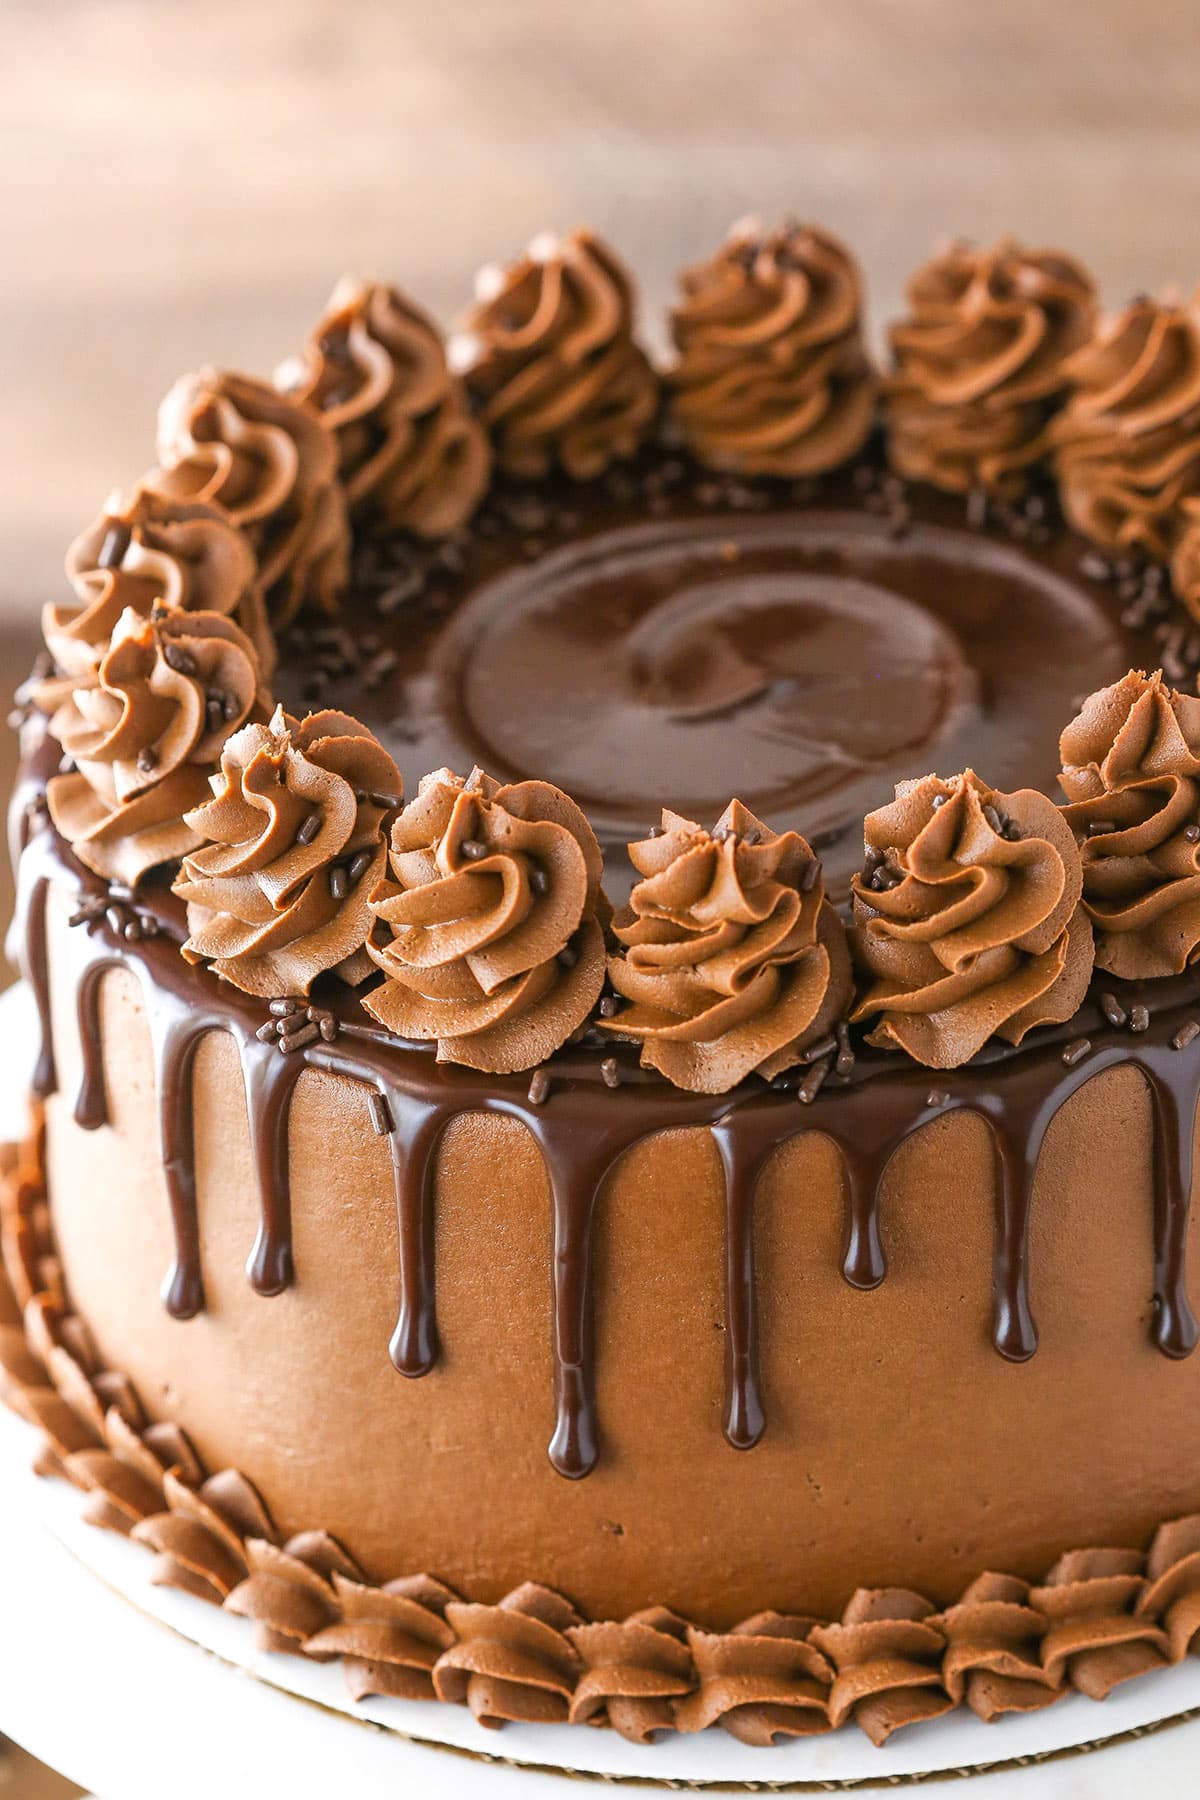 Close up of a decorated chocolate cake with ganache